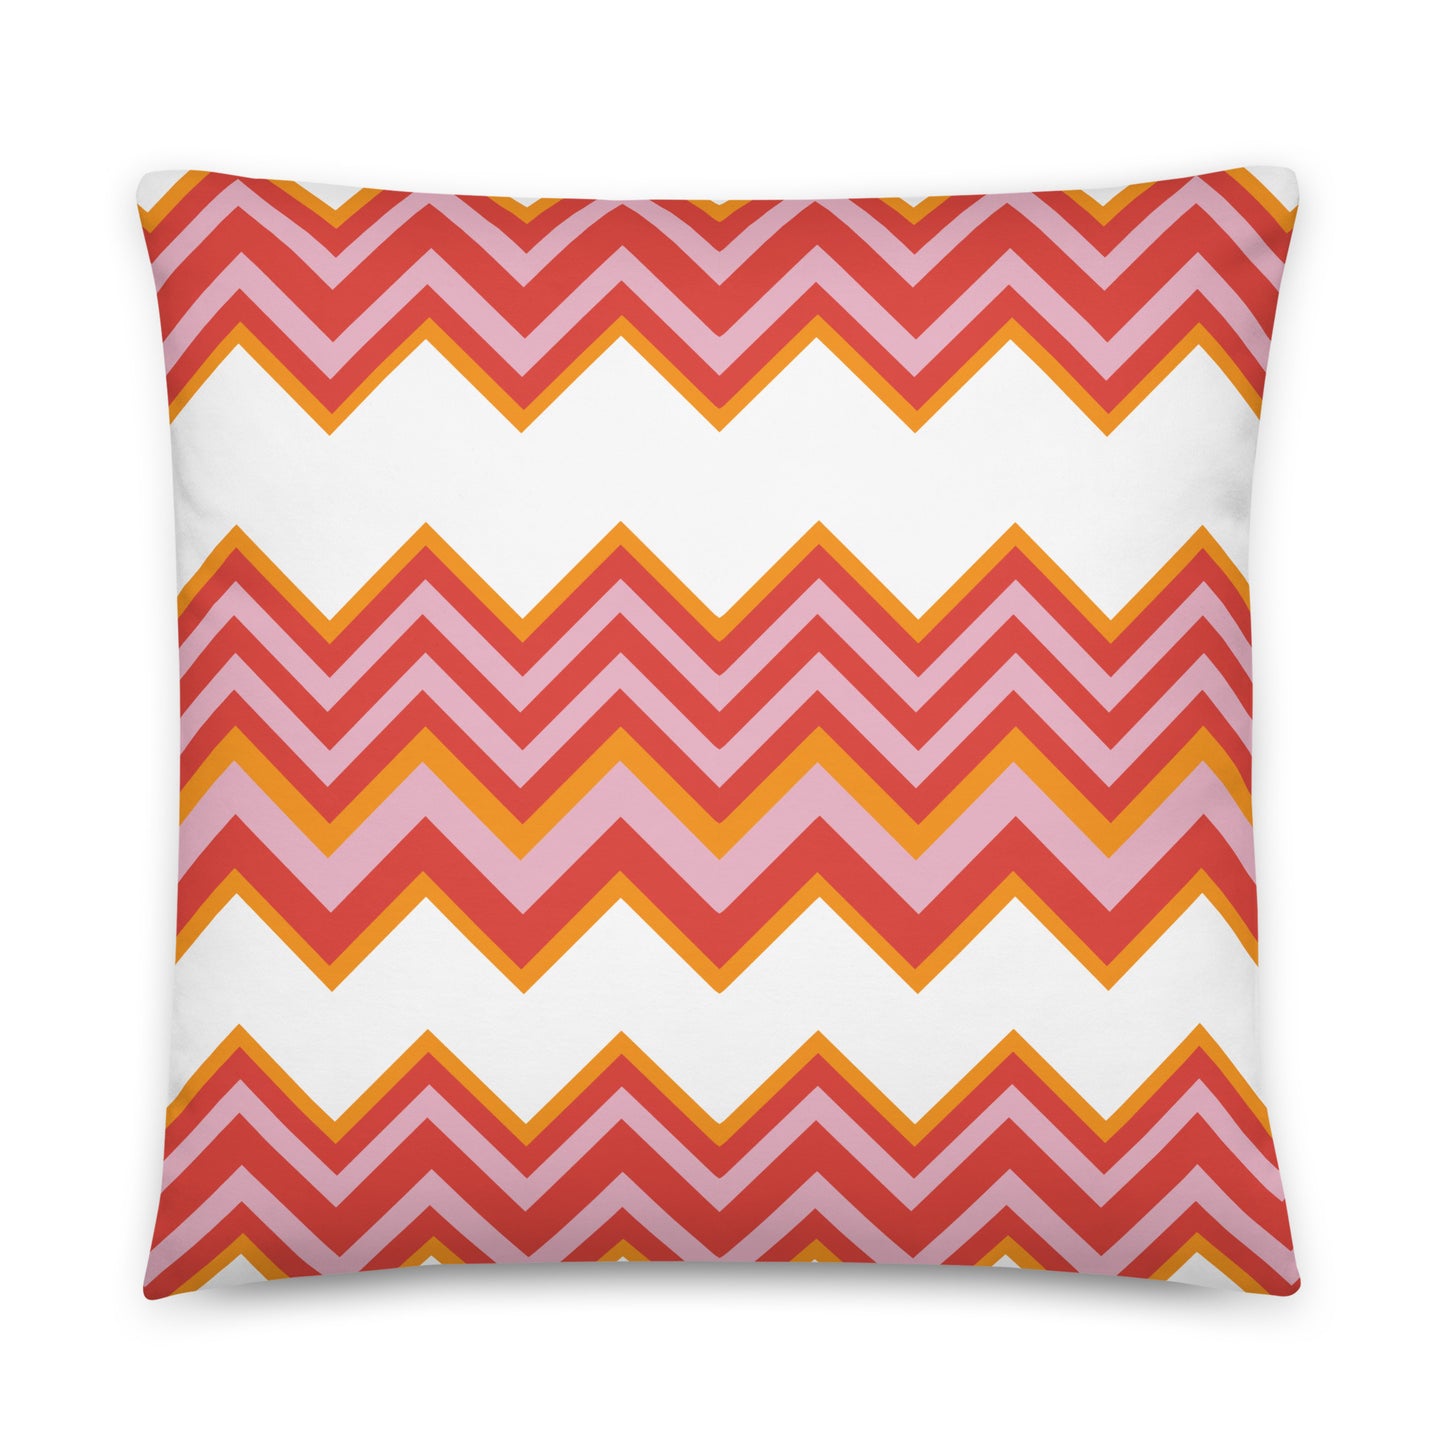 Retro Zigzag - Inspired By Taylor Swift - Sustainably Made Basic Pillow